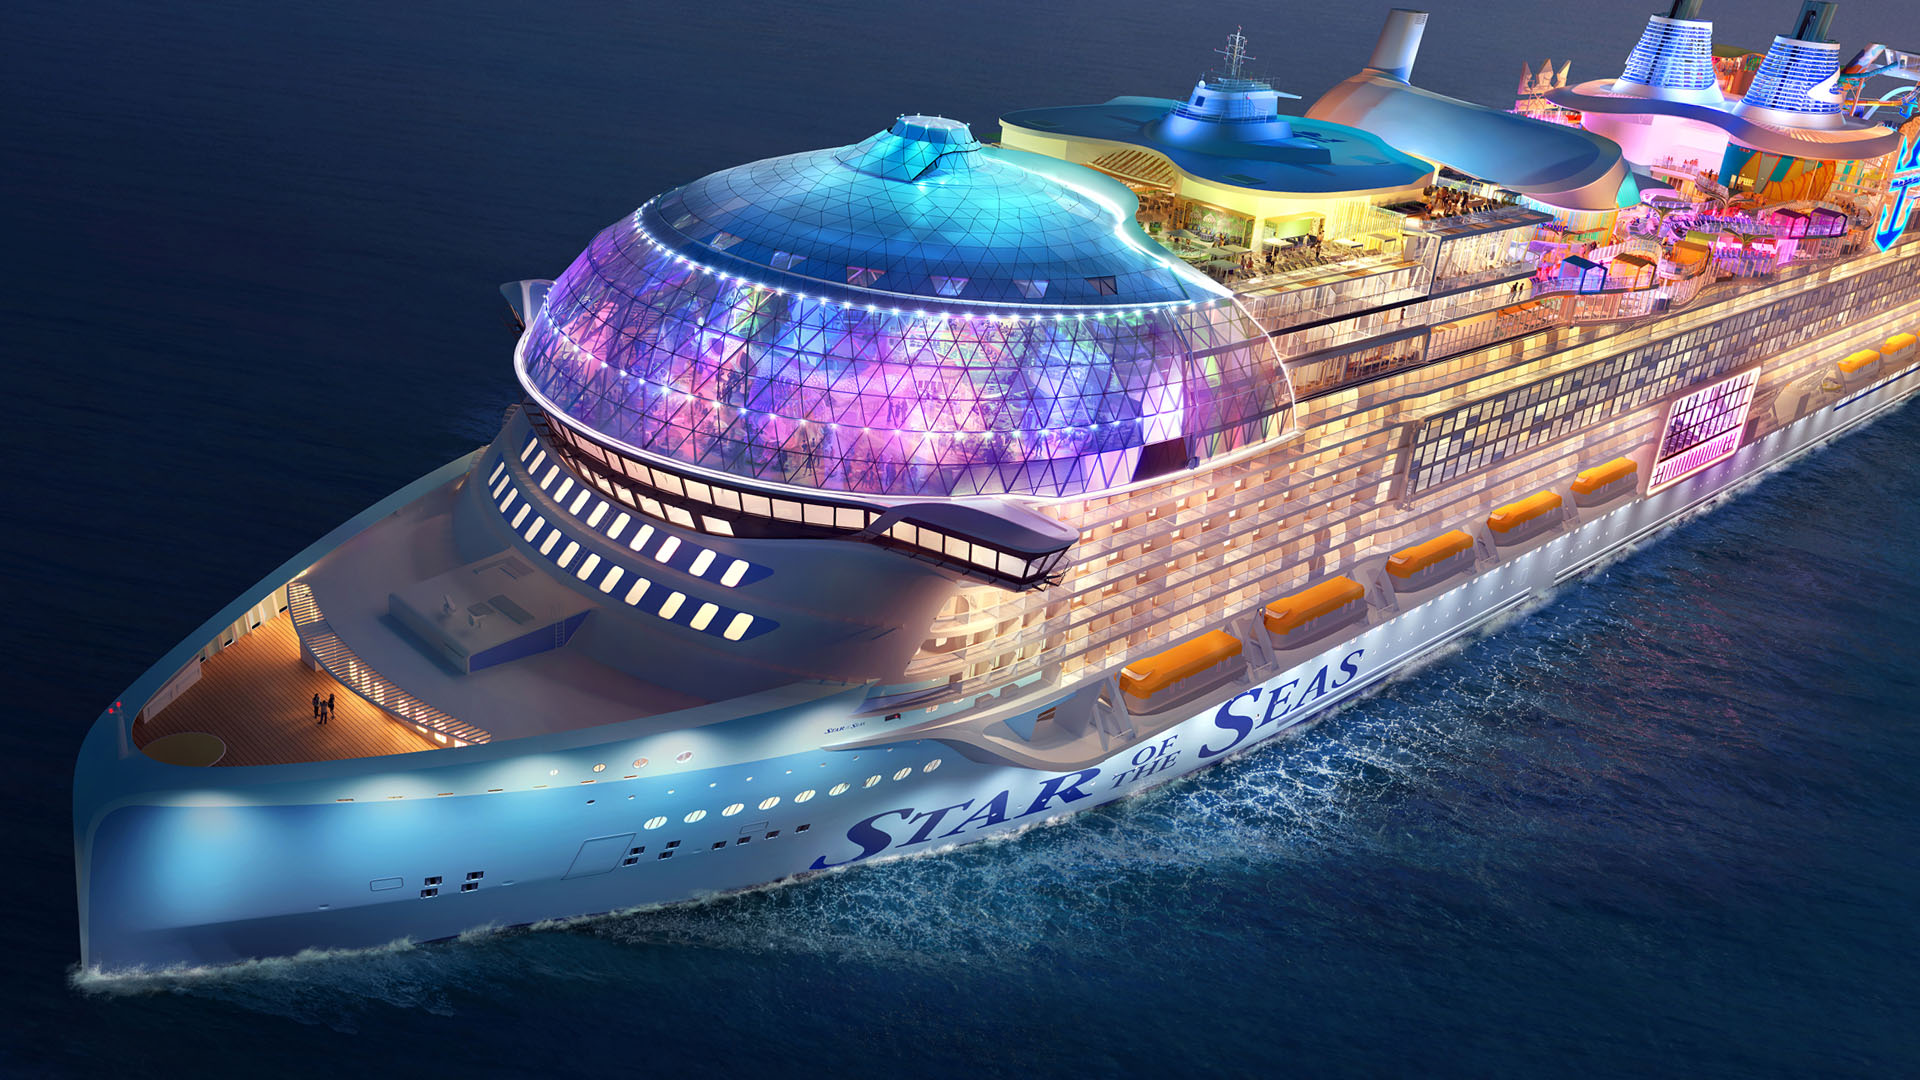 Star of the Seas Coming To Port Canaveral Cruise Spotlight